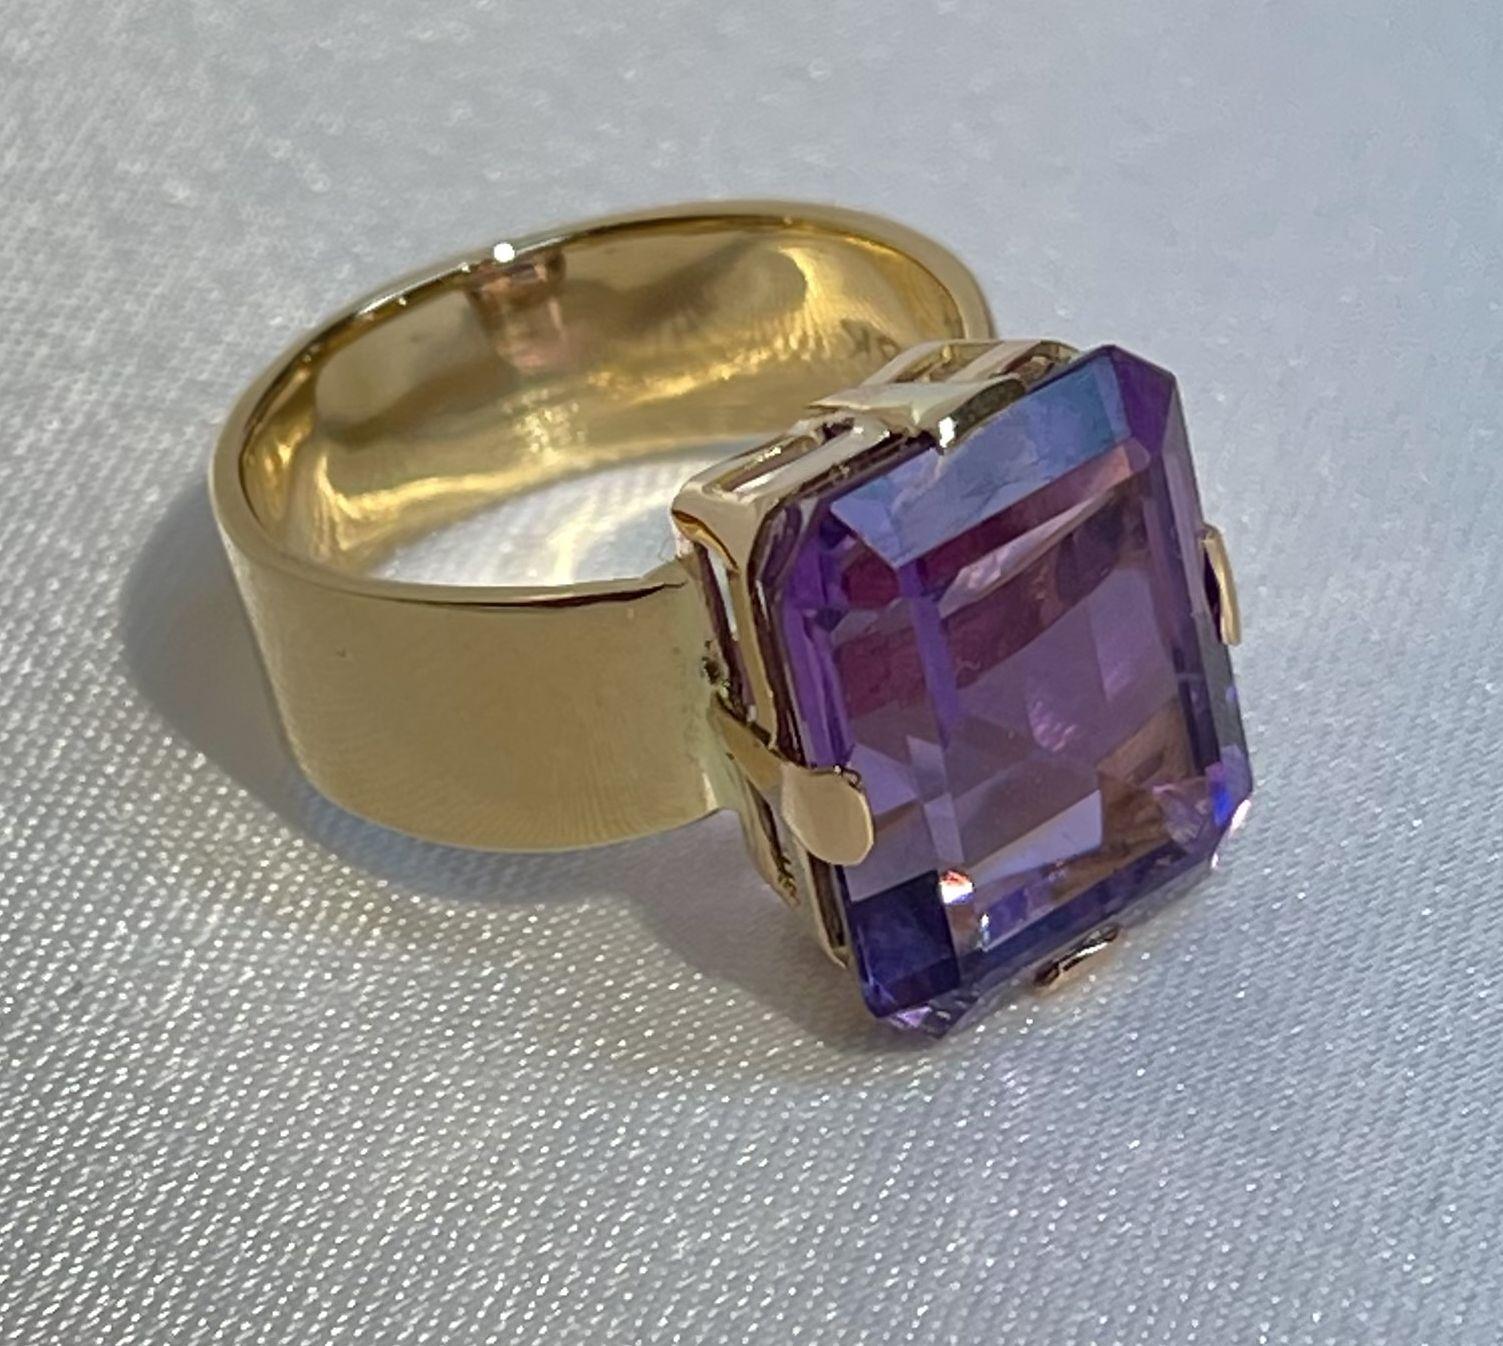 Simply Beautiful! Finely detailed Statement Large Emerald Cut Amethyst Solitaire Gold Cocktail Ring. Centering a securely nestled 9.60 Carat Emerald-cut Amethyst in prong setting. Amethyst measures approx. 14.3mm l x 11.8mm w x 8.5mm d. Hand crafted